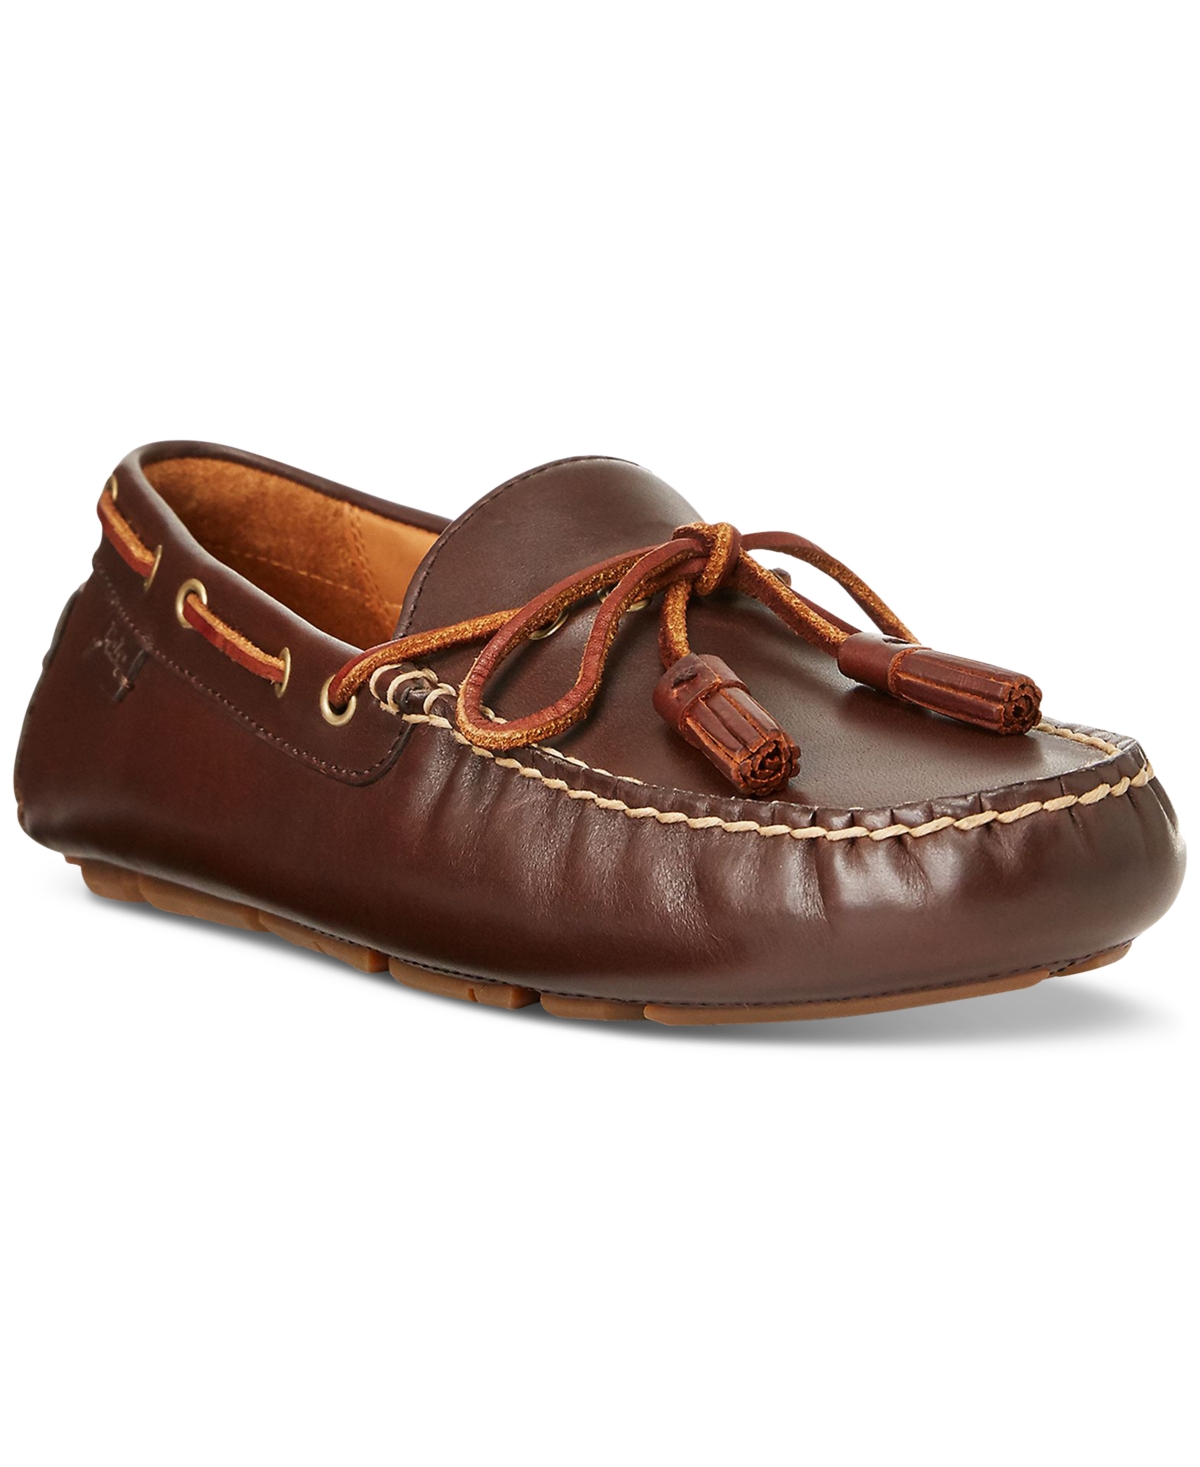 POLO RALPH LAUREN MEN'S ANDERS TASSELED LEATHER DRIVER LOAFER